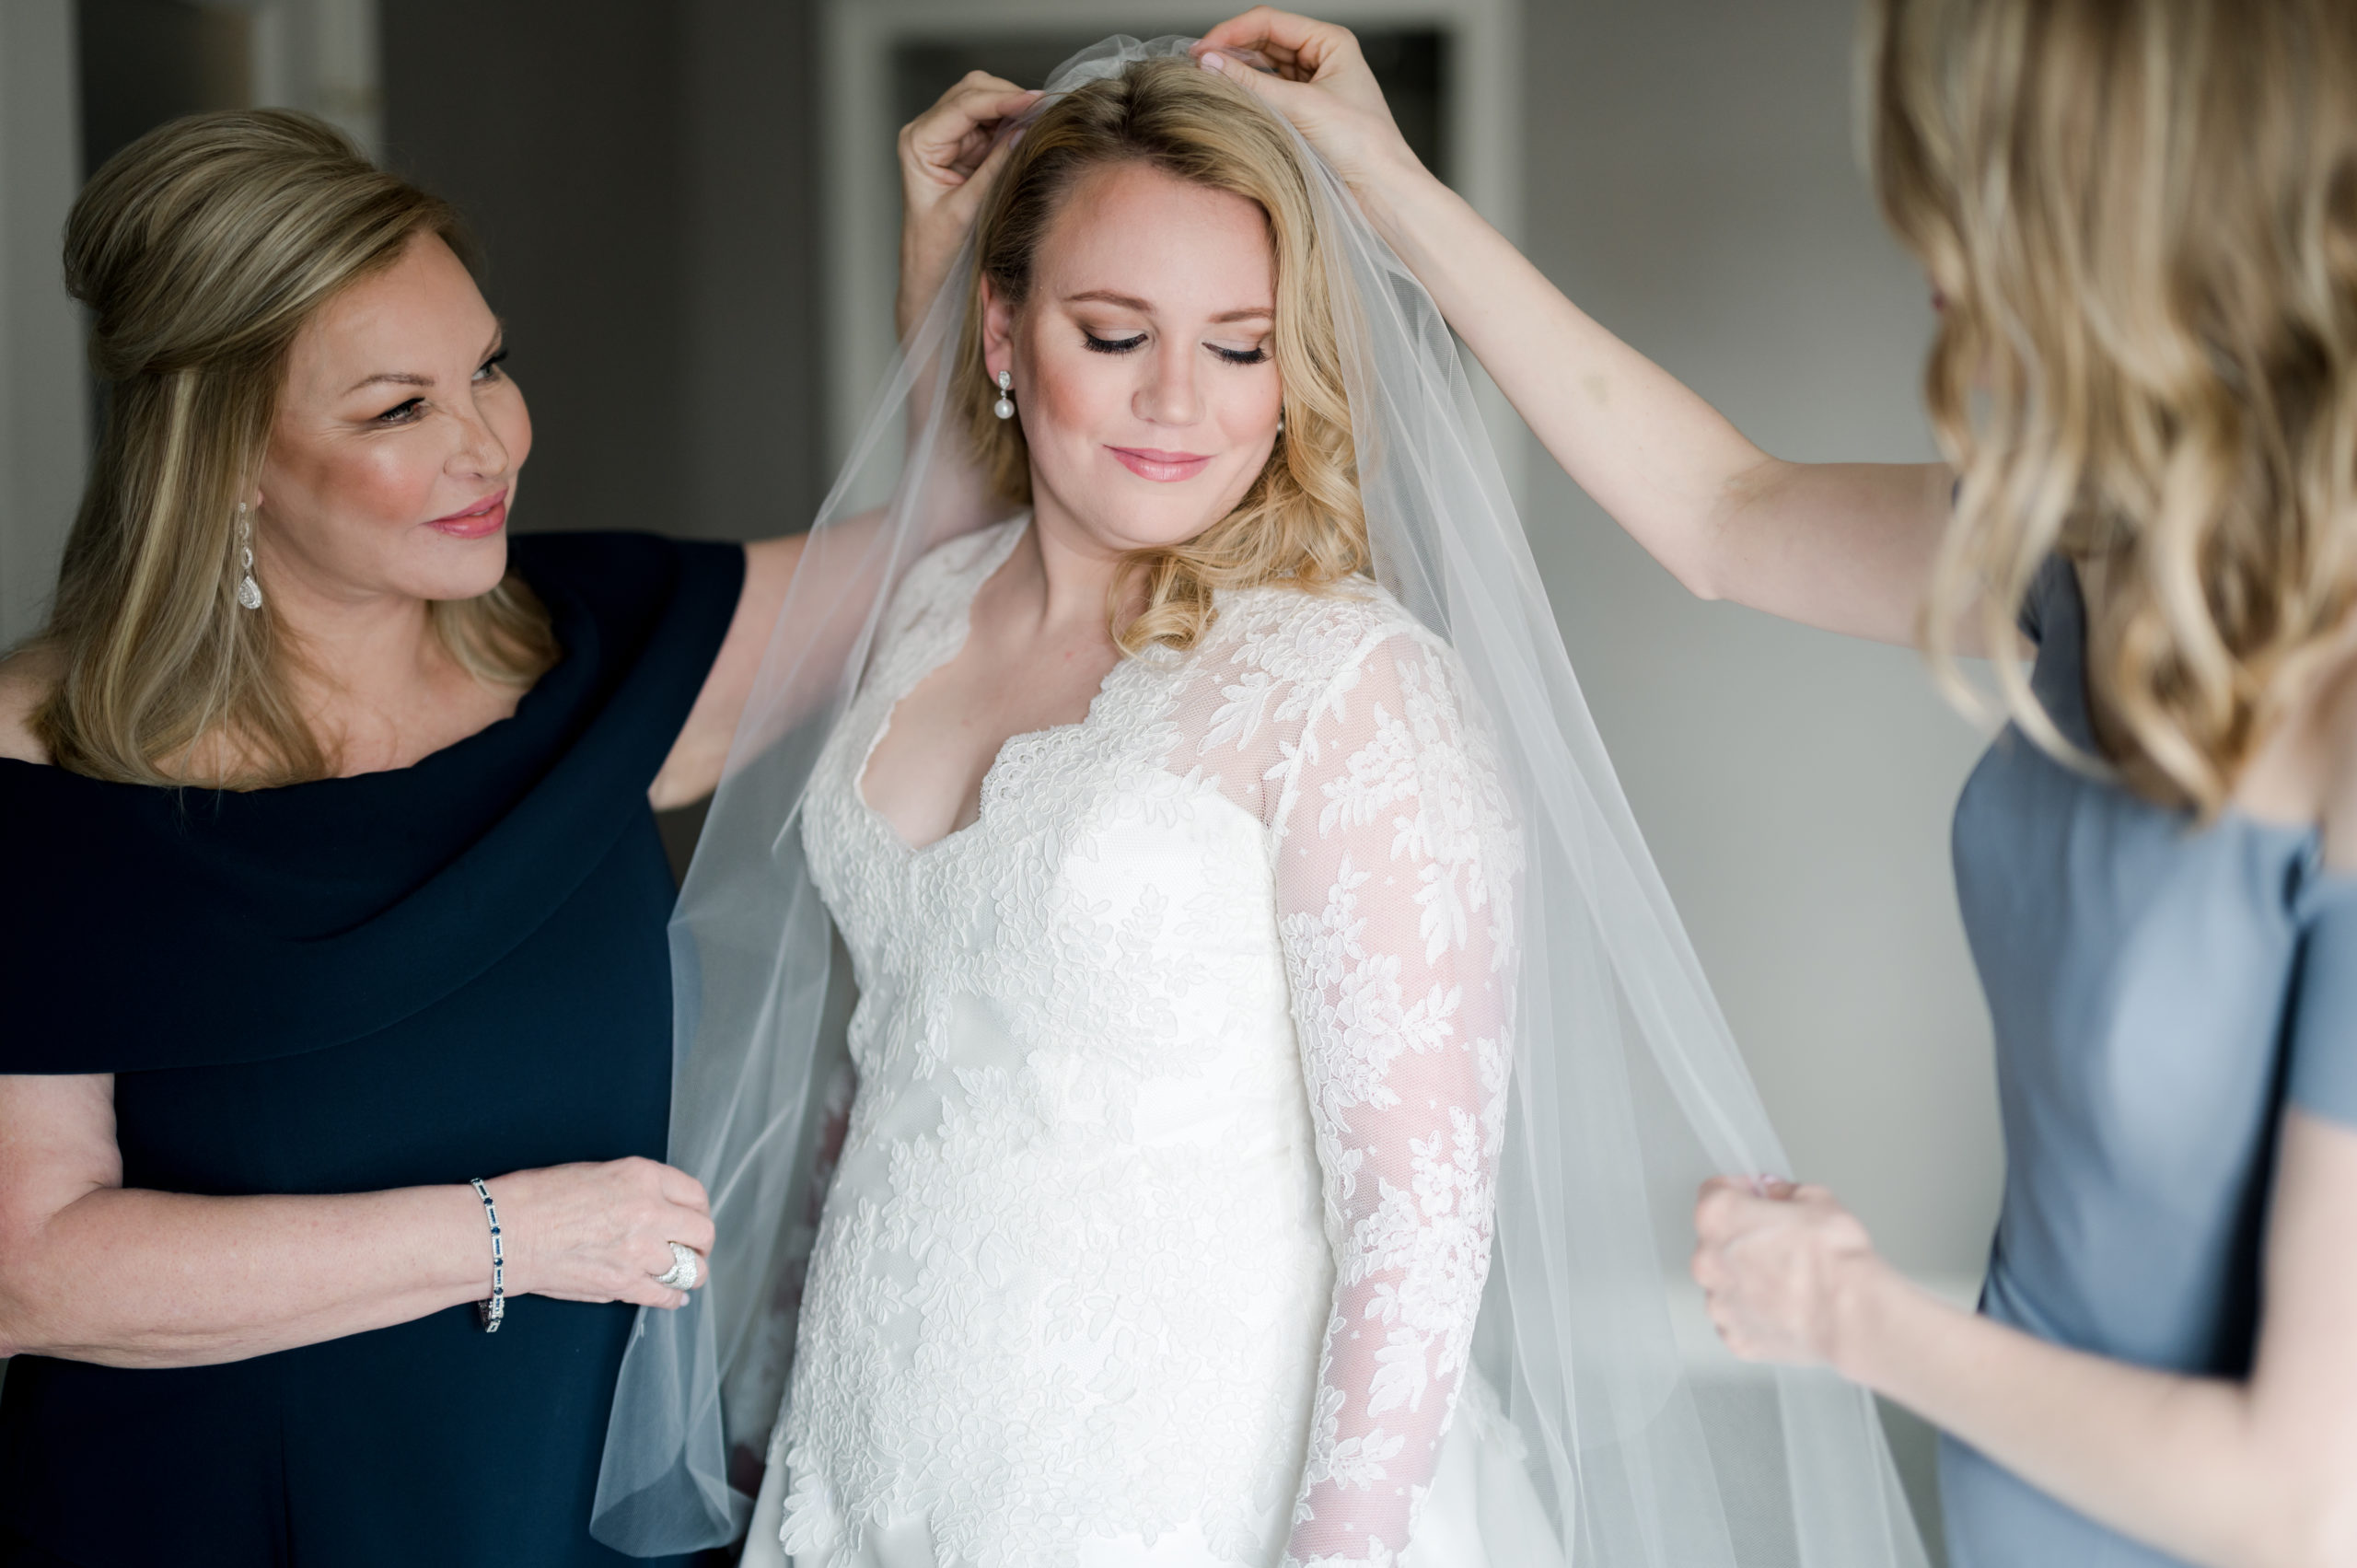 St. Louis Wedding at Bellerive - Catherine Guidry Photography